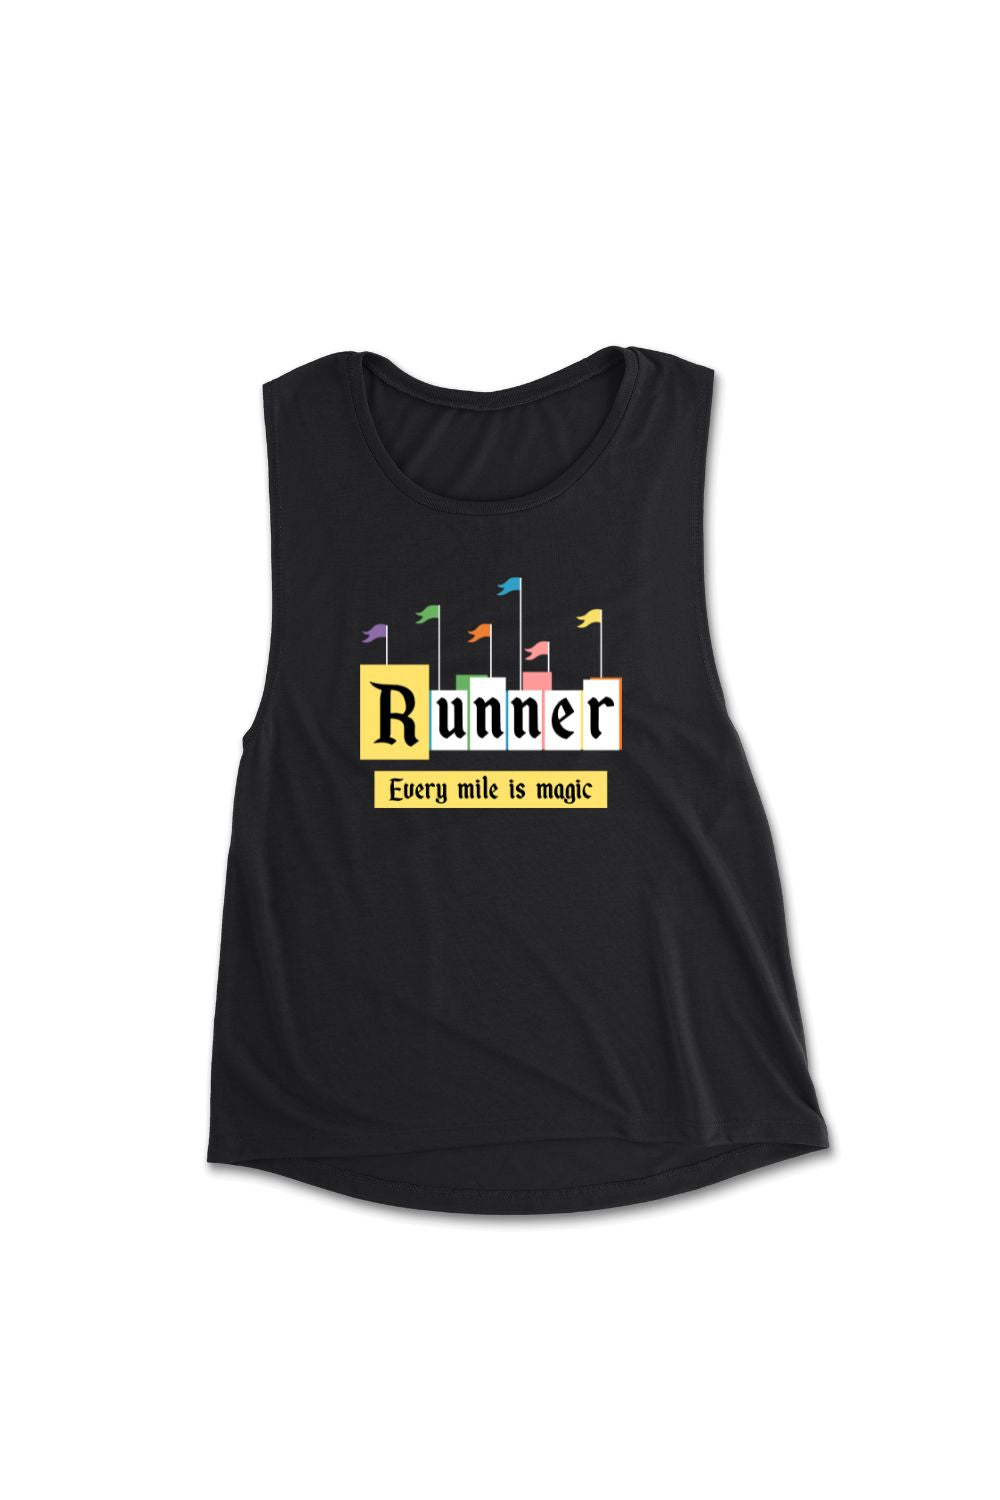 Runner Every Mile Is Magic Tank